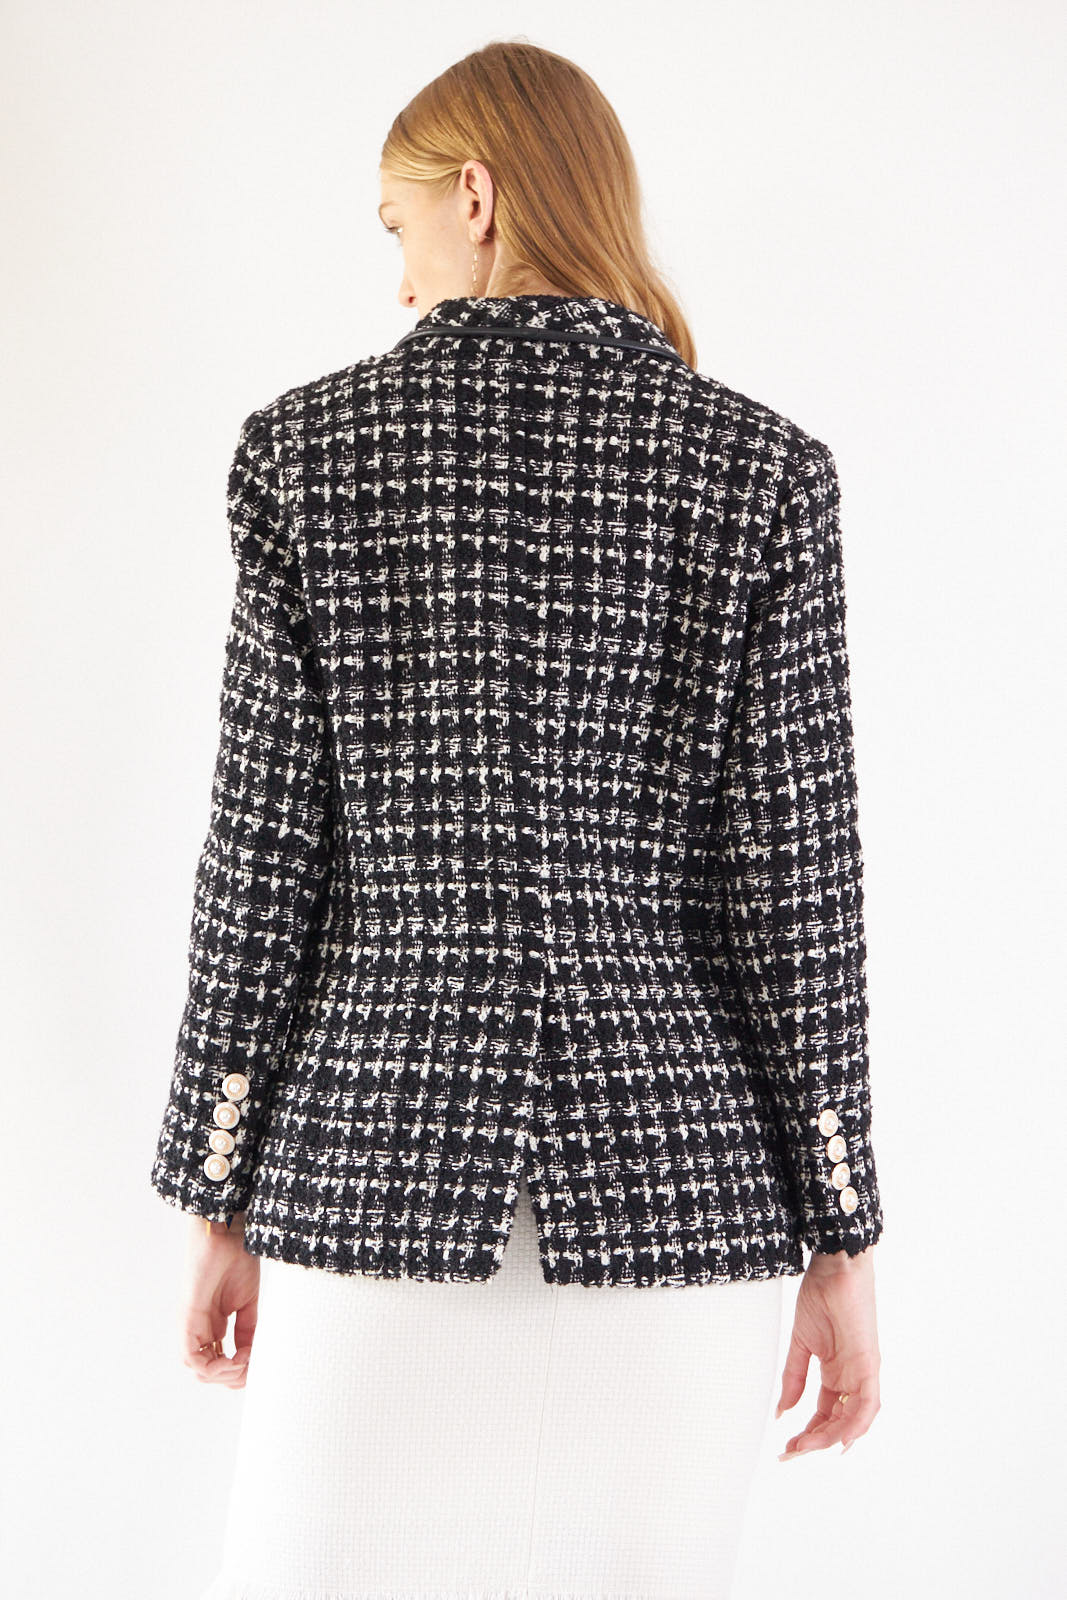  Power Woman - Black & White Tweed Checkers Jacket: Embrace Classic Sophistication with Le Réussi